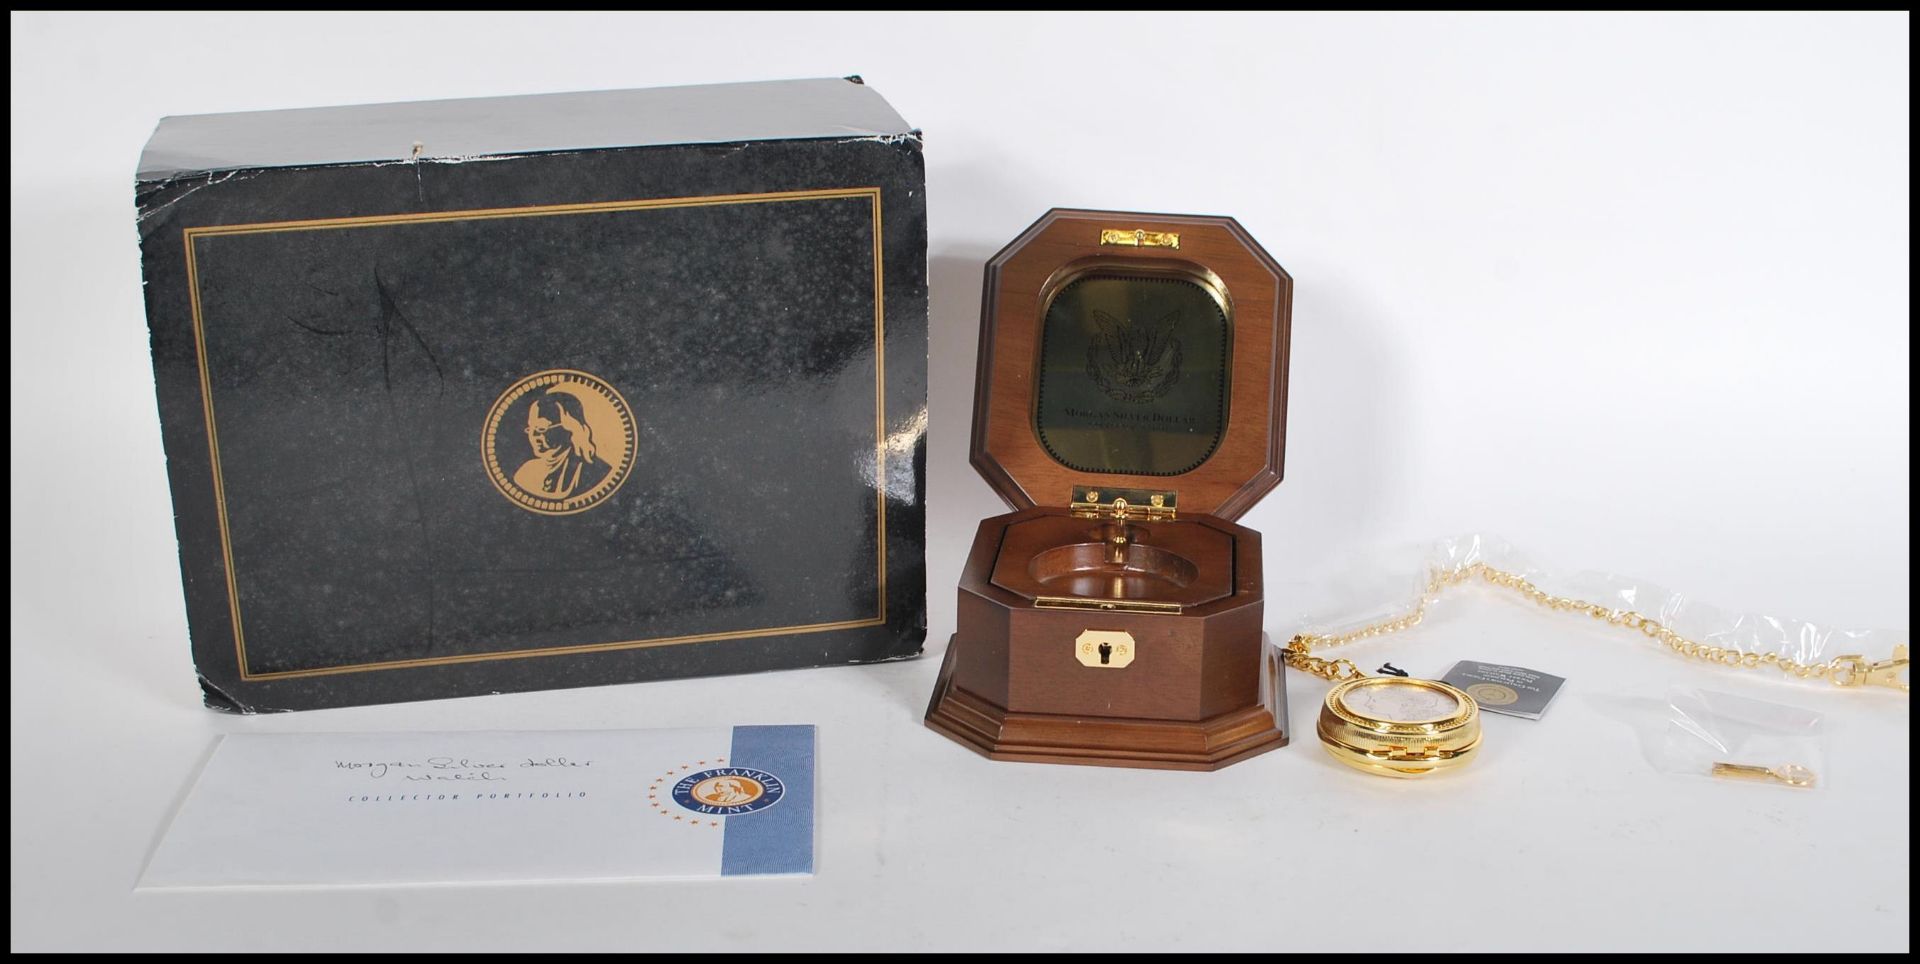 Franklin Mint Morgan Silver Dollar - Gold plated collectors full hunter pocket pocket watch with